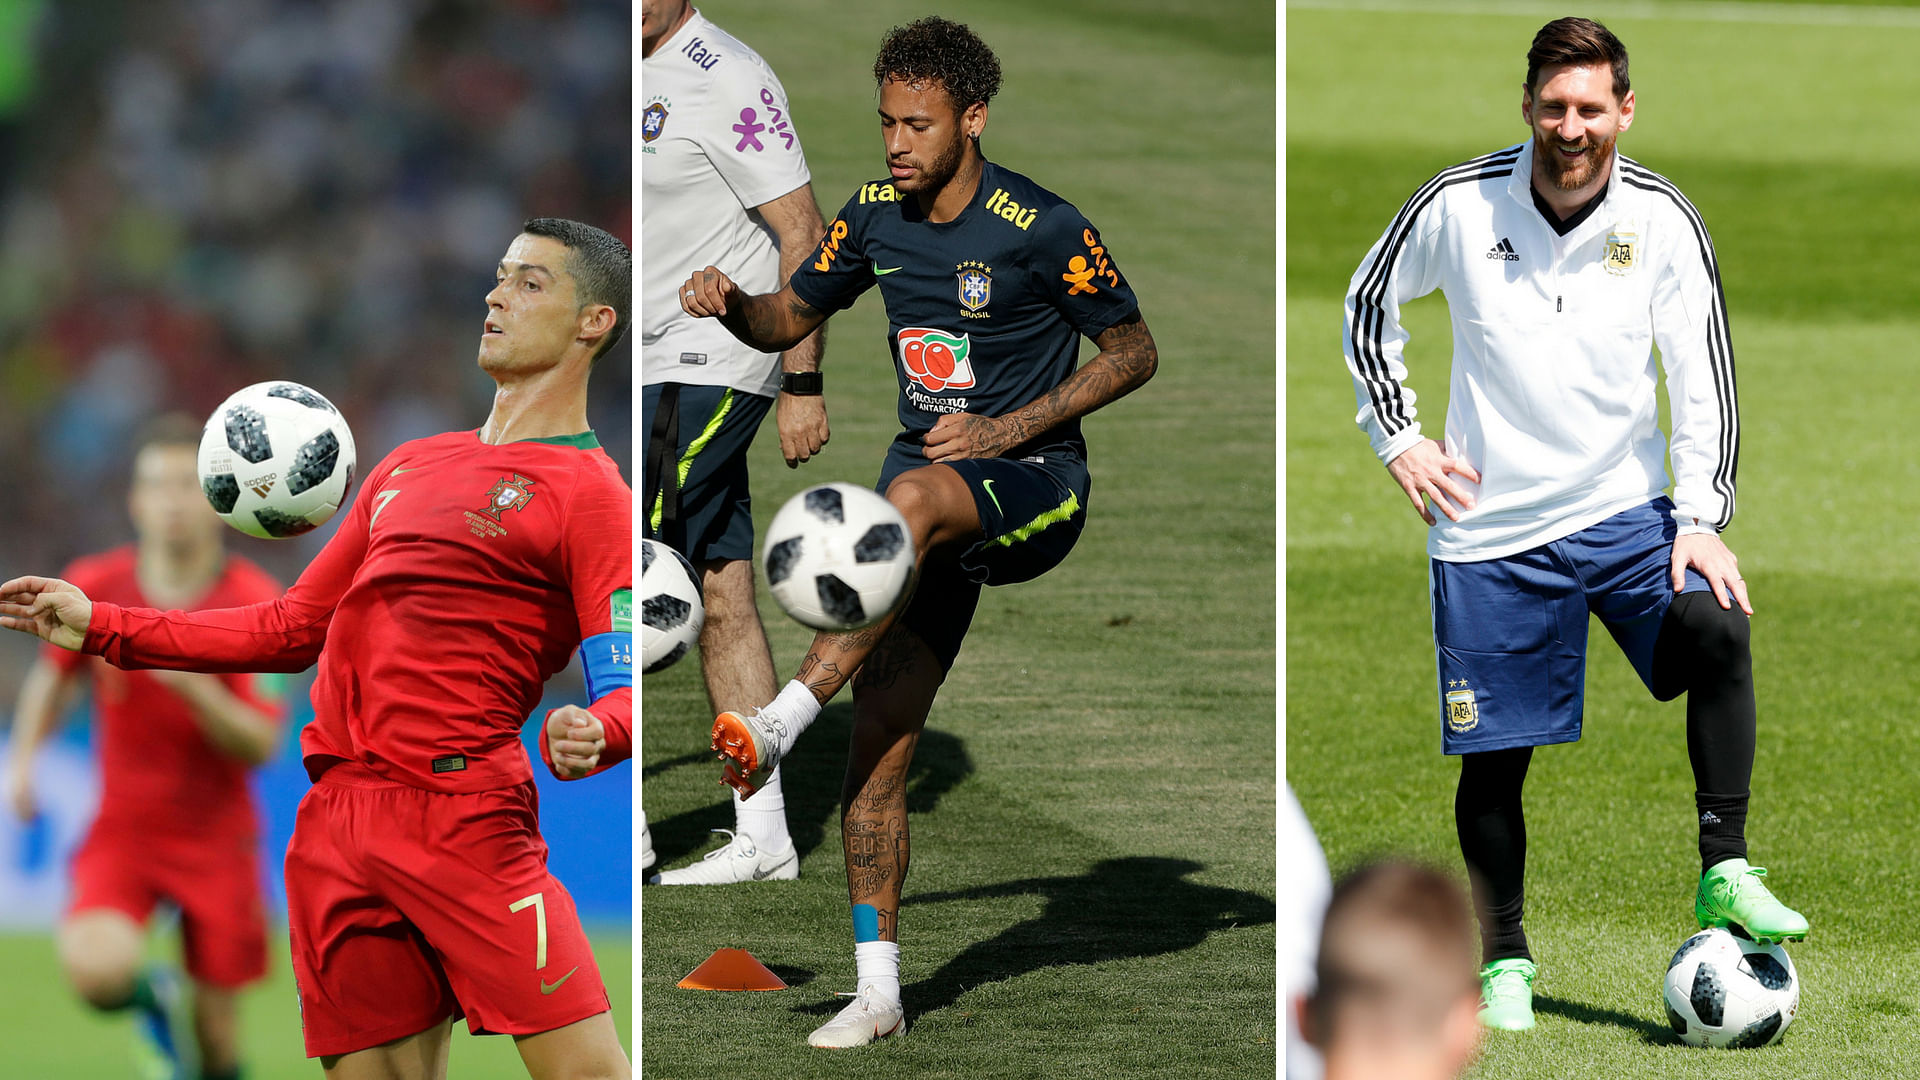 Cristiano Ronaldo, Neymar and Lionel Messi will all look to inspire their teams in their quest for the trophy at the FIFA World Cup 2018